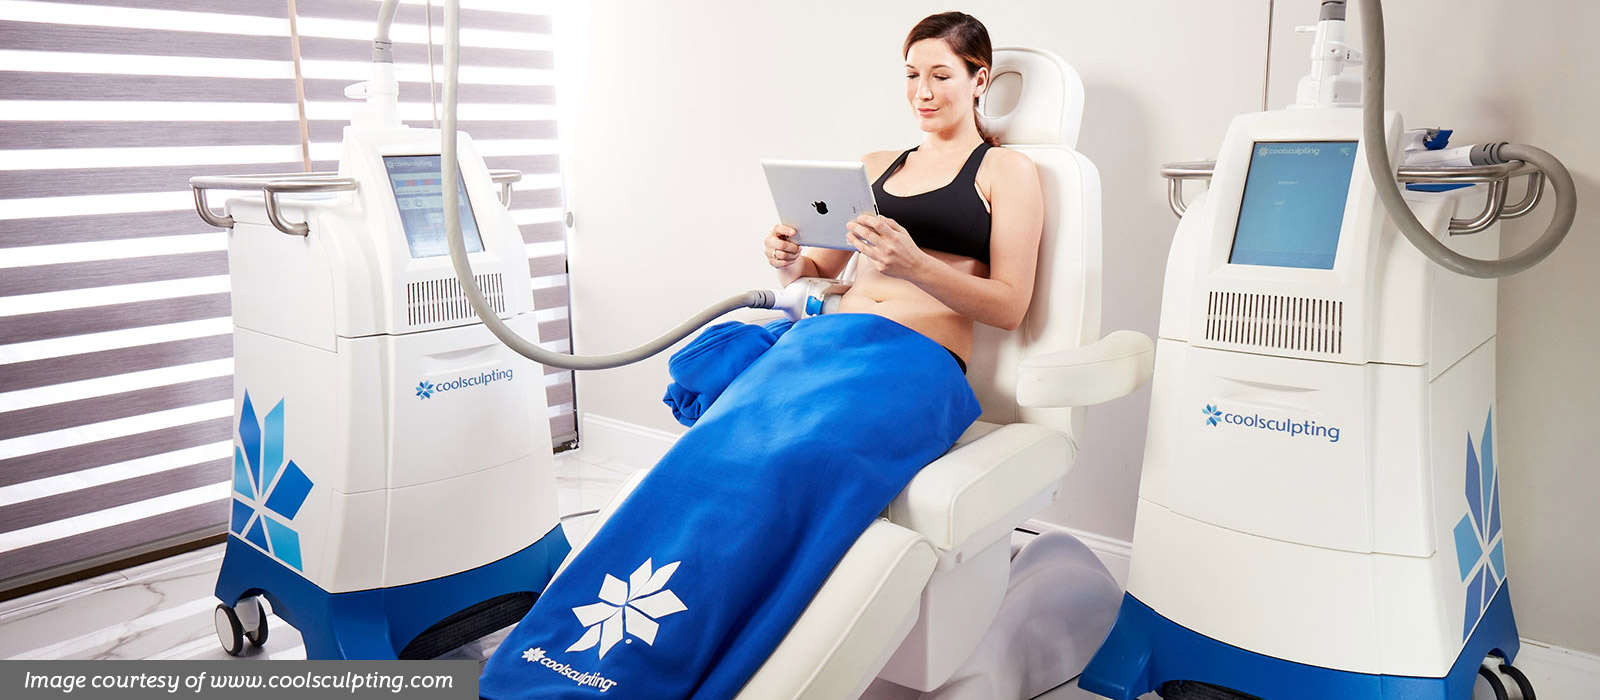 Woman in black sports bra reclines in treatment chair, reading an iPad, while a CoolSculpting paddle is attached to her abdomen